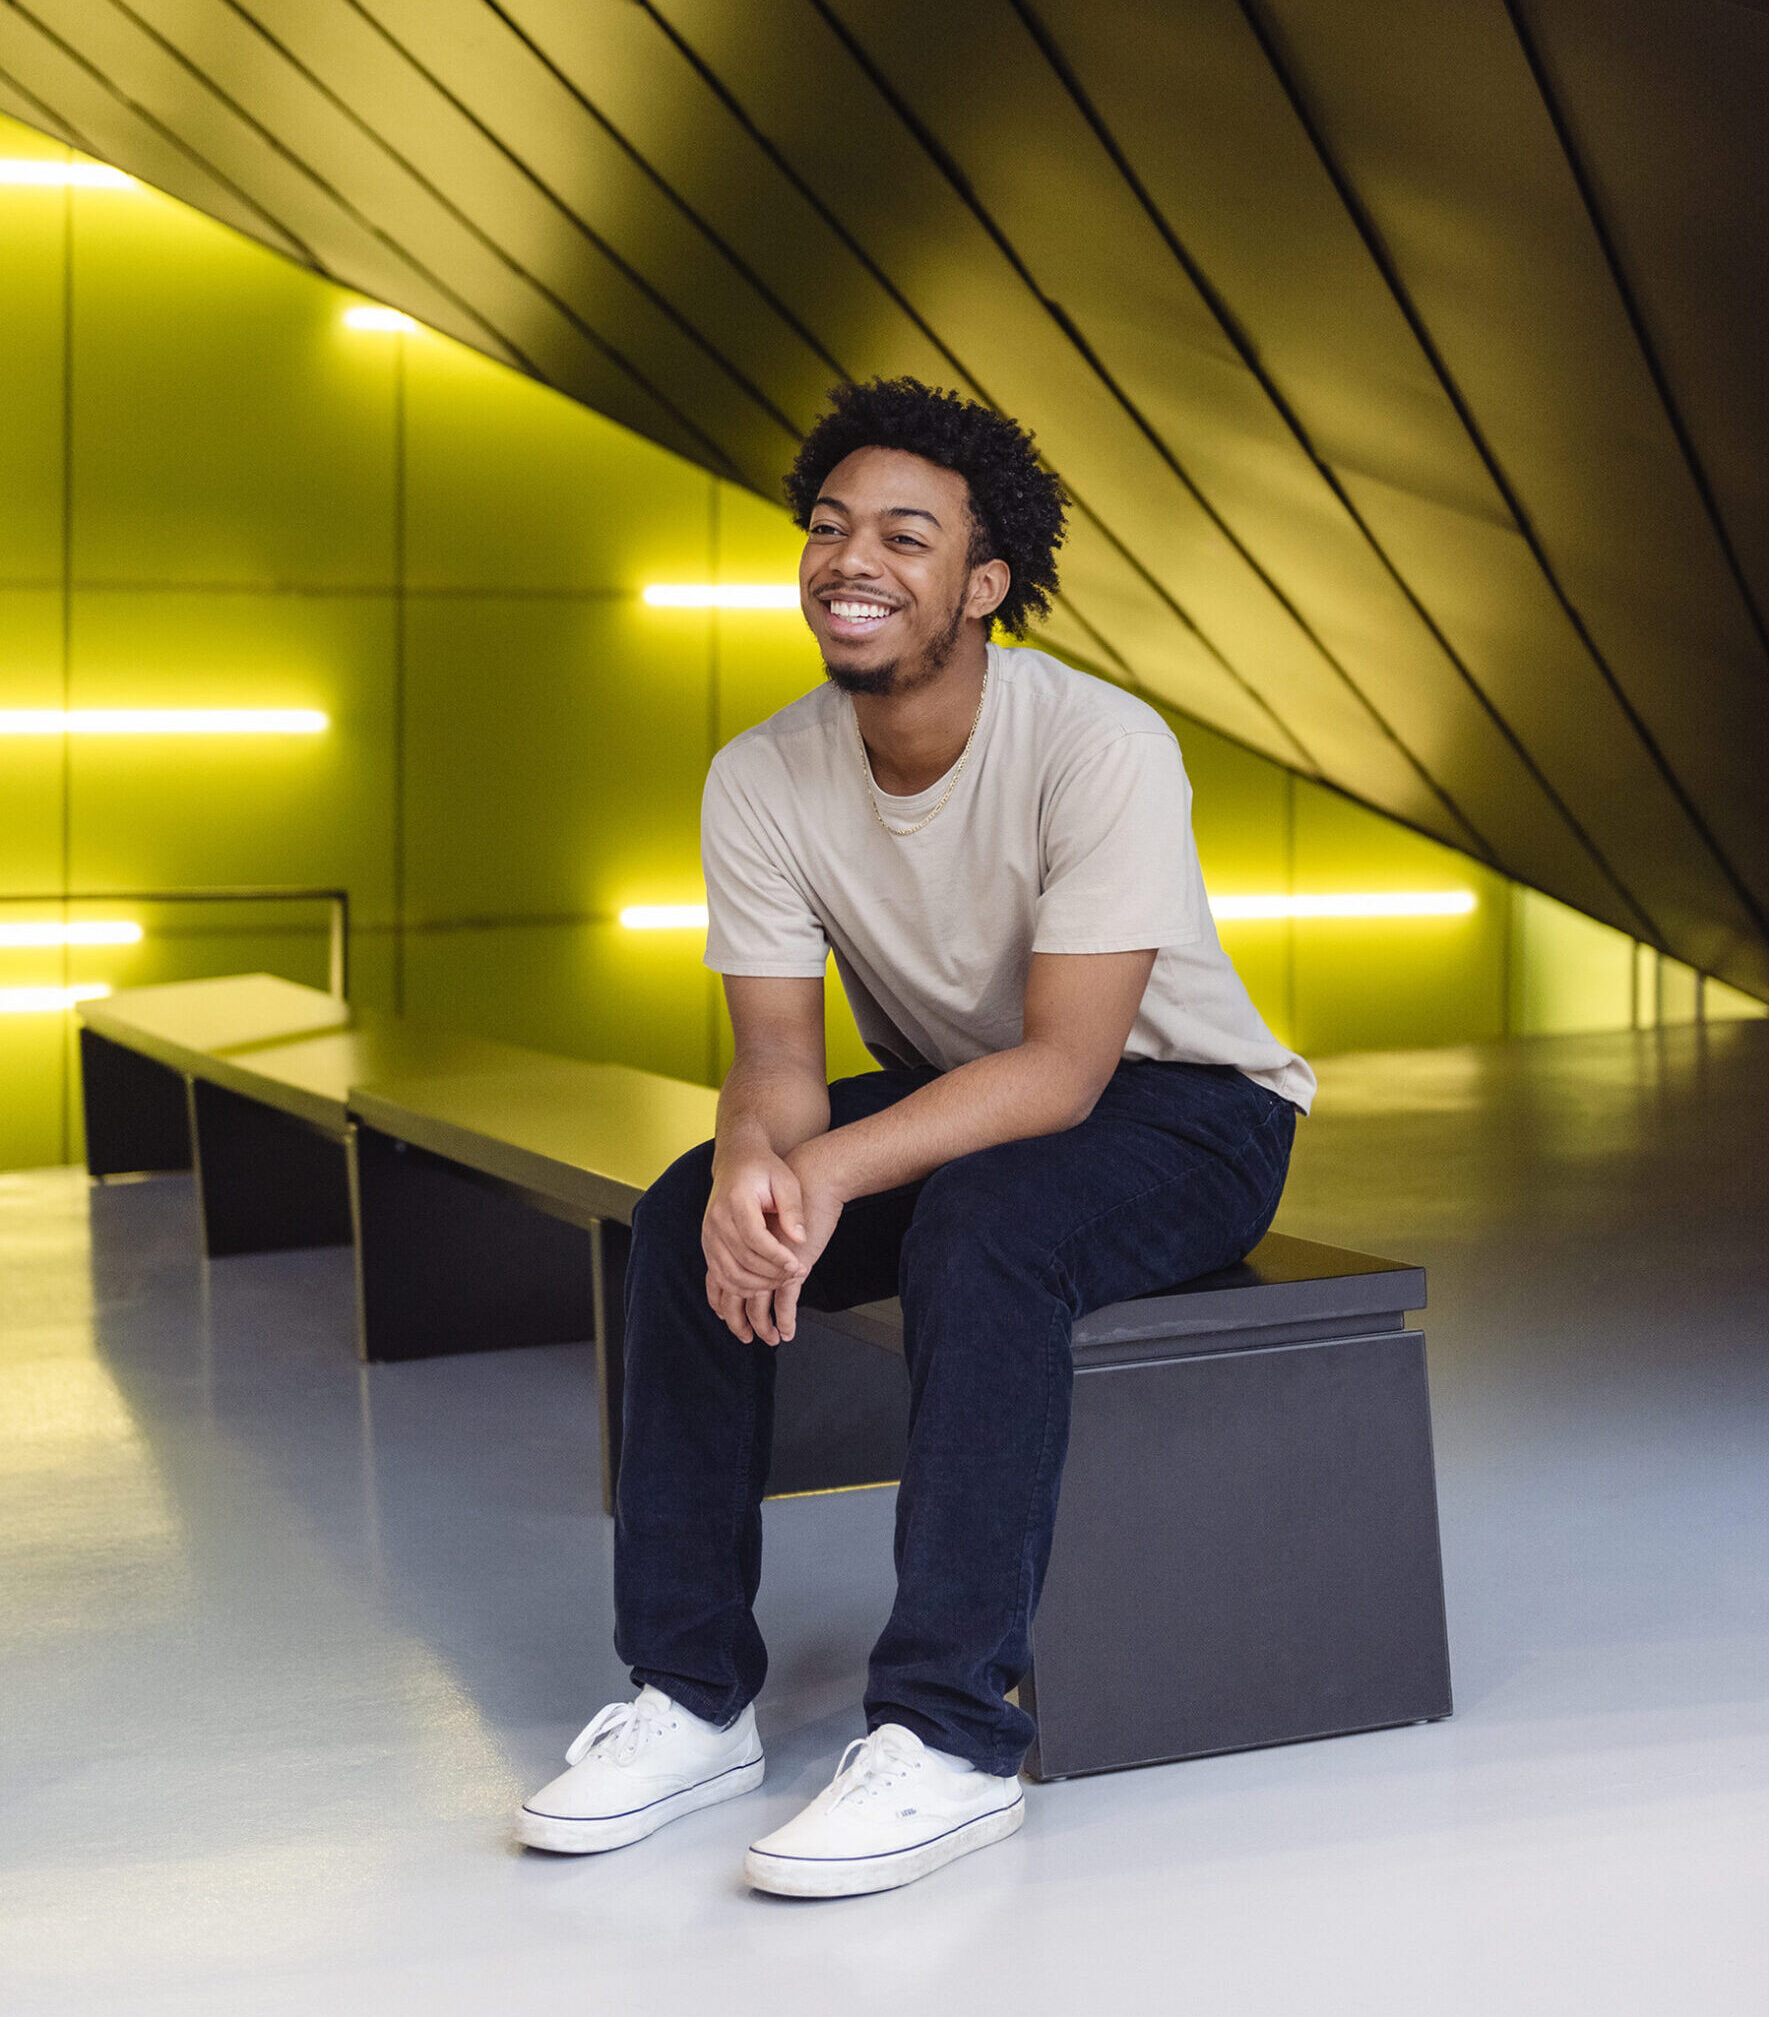 Giovanni Williams in a beige T-shirt, black jeans and white sneakers, sitting on a black wooden bench under a panelled ceiling that slopes down to the floor at the middle right of the photo. He is smiling and facing off camera, with his shoulders hunched and his forearms resting on his thighs. Several fluorescent tubes are placed along the wall at the far end of the bench, giving off a neon yellow light.